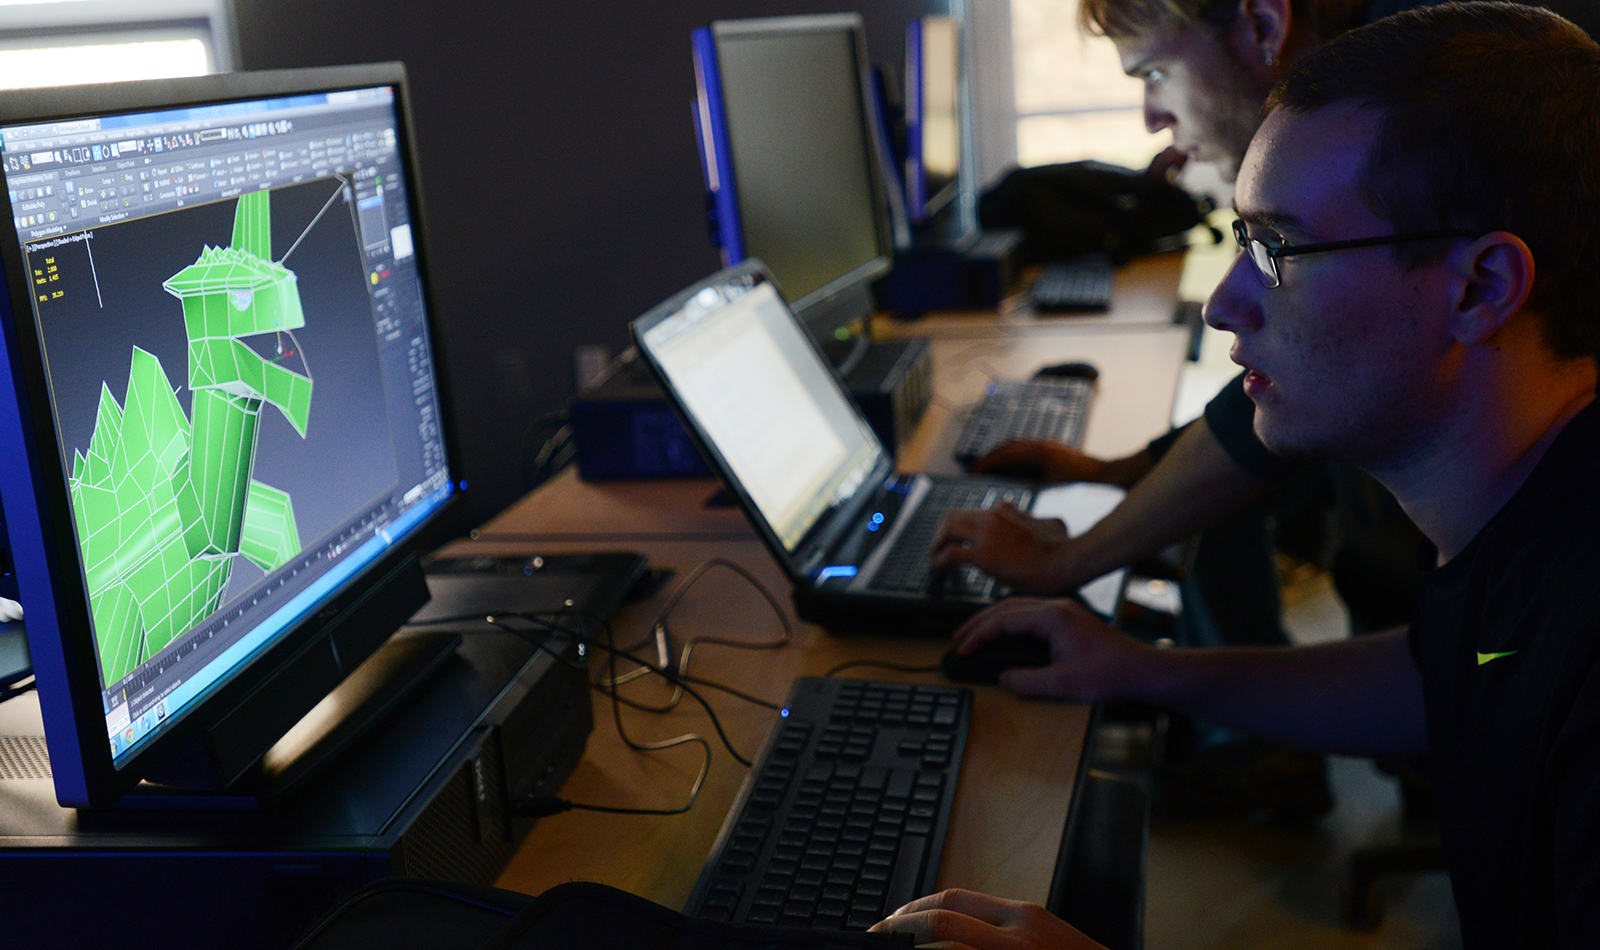 Students use state-of-the-art technology to create their own games from day one in the Computer Game Design program.